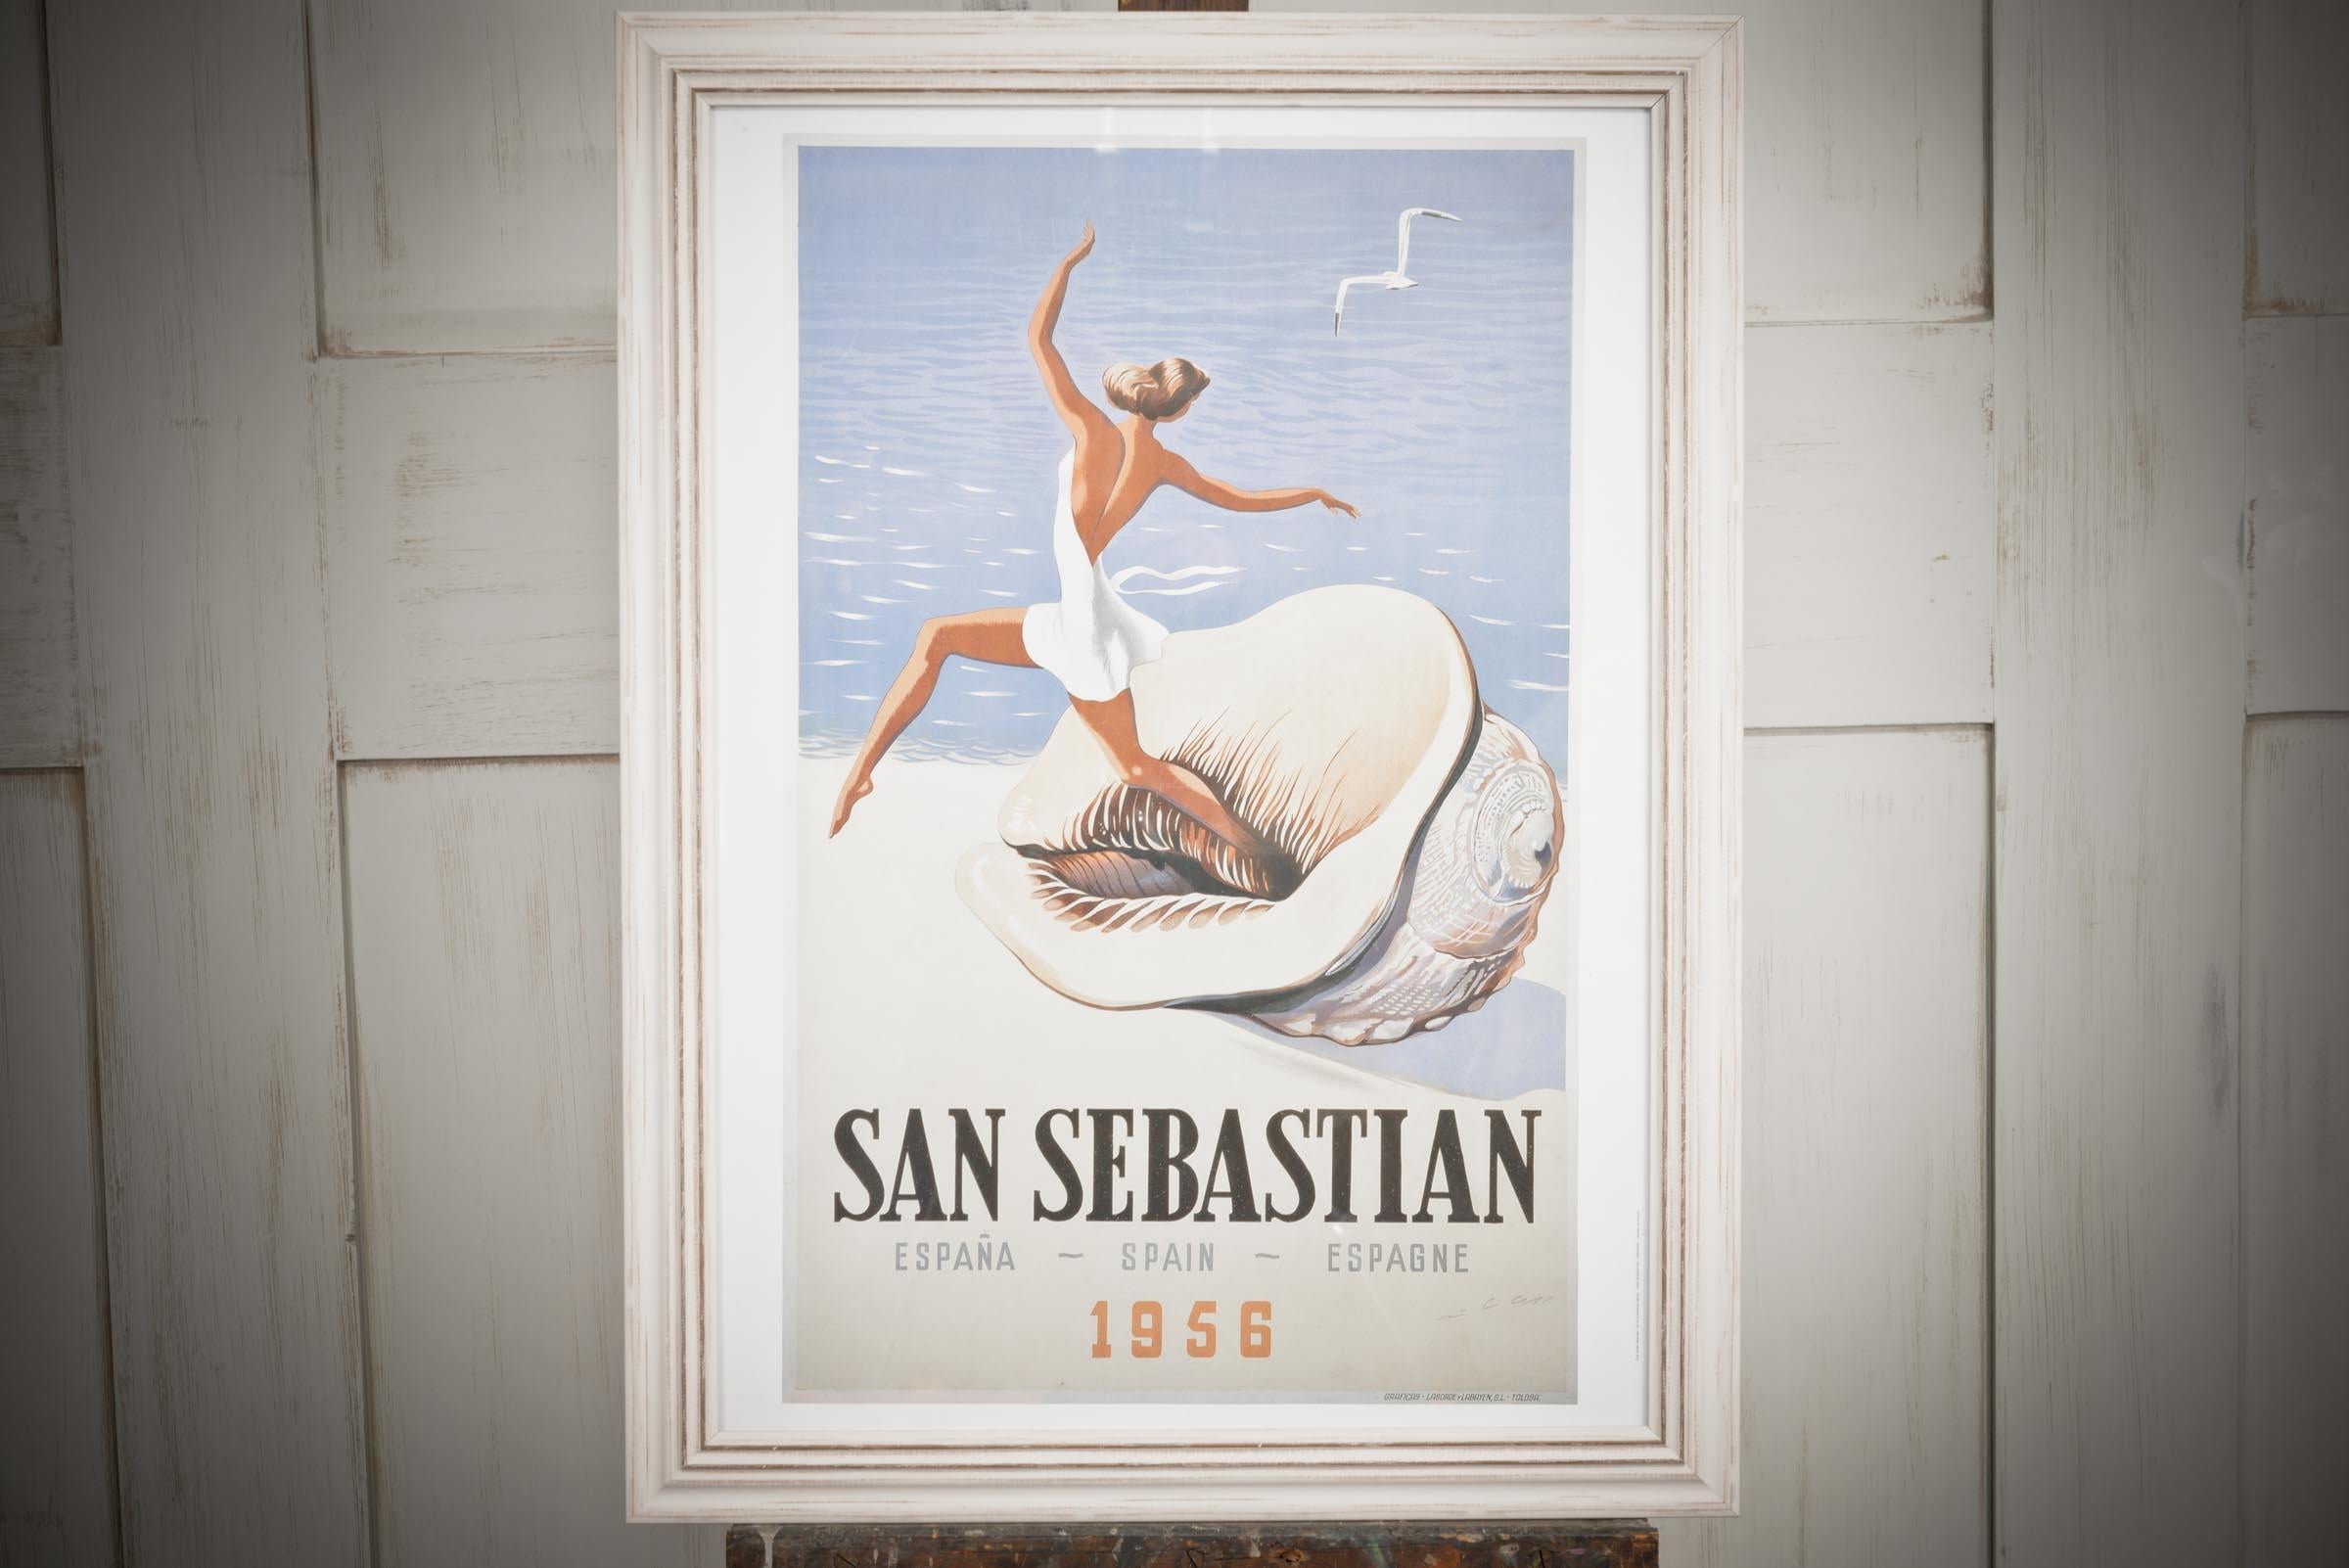 Stunning framed poster from 1956 San Sebastian Spain - An elegant lady dancing from a over sized shell on the sandy shores of San Sebastian. This poster would add class and elegance to any room of the home bringing sunshine to everyday by whisking